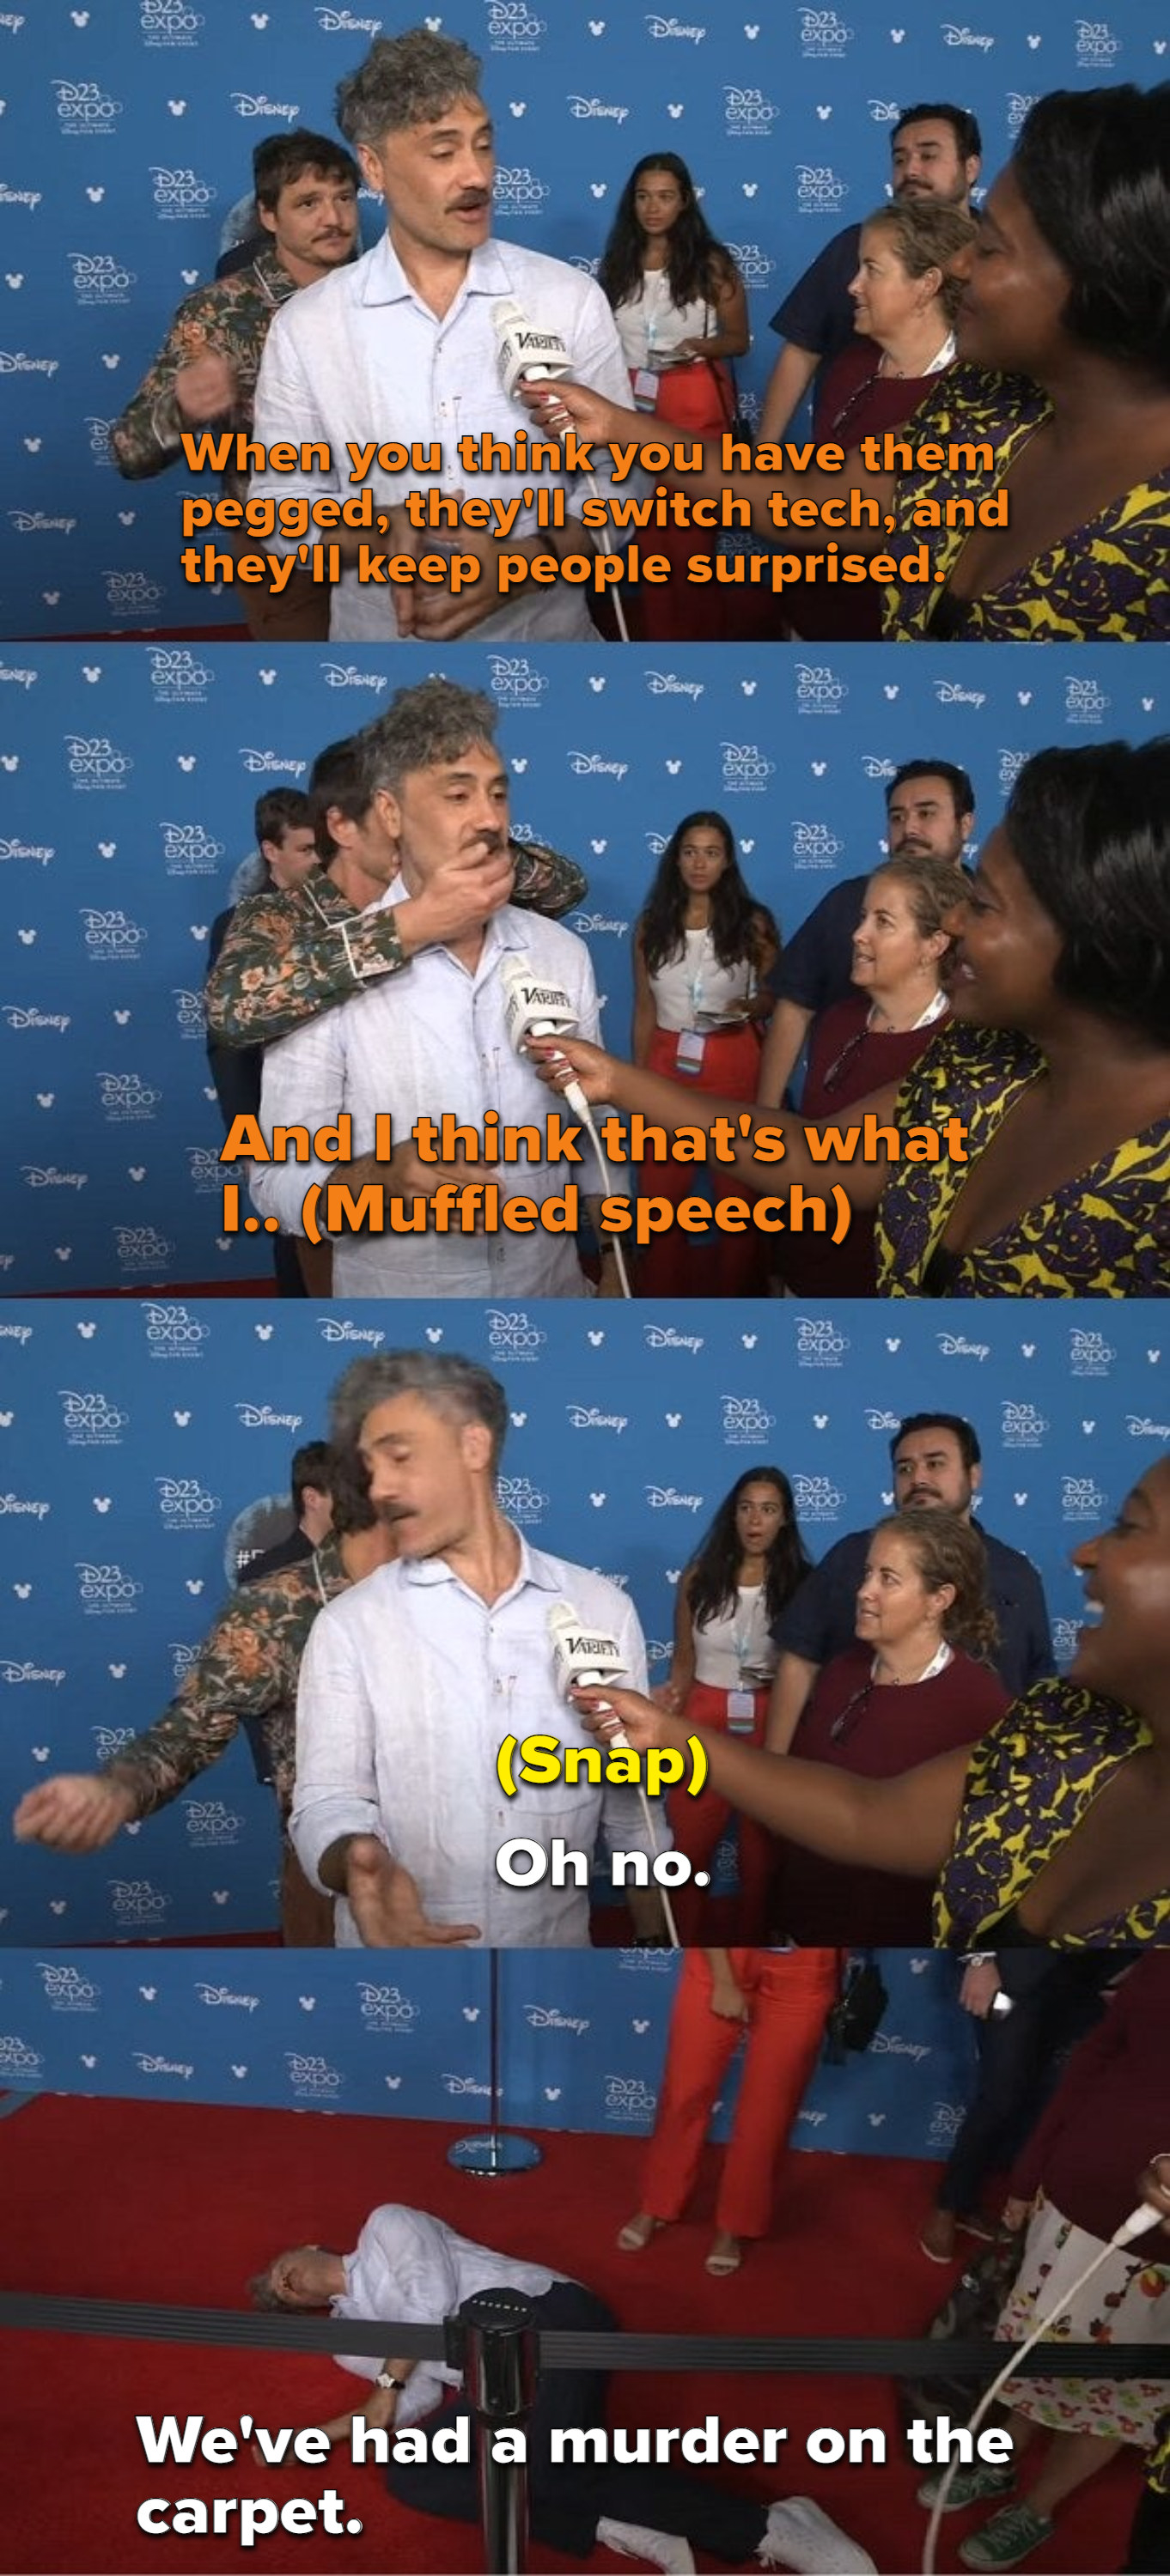 Pedro Pascal sneaking up to Taika Waitiki and pretending to snap his neck mid interview